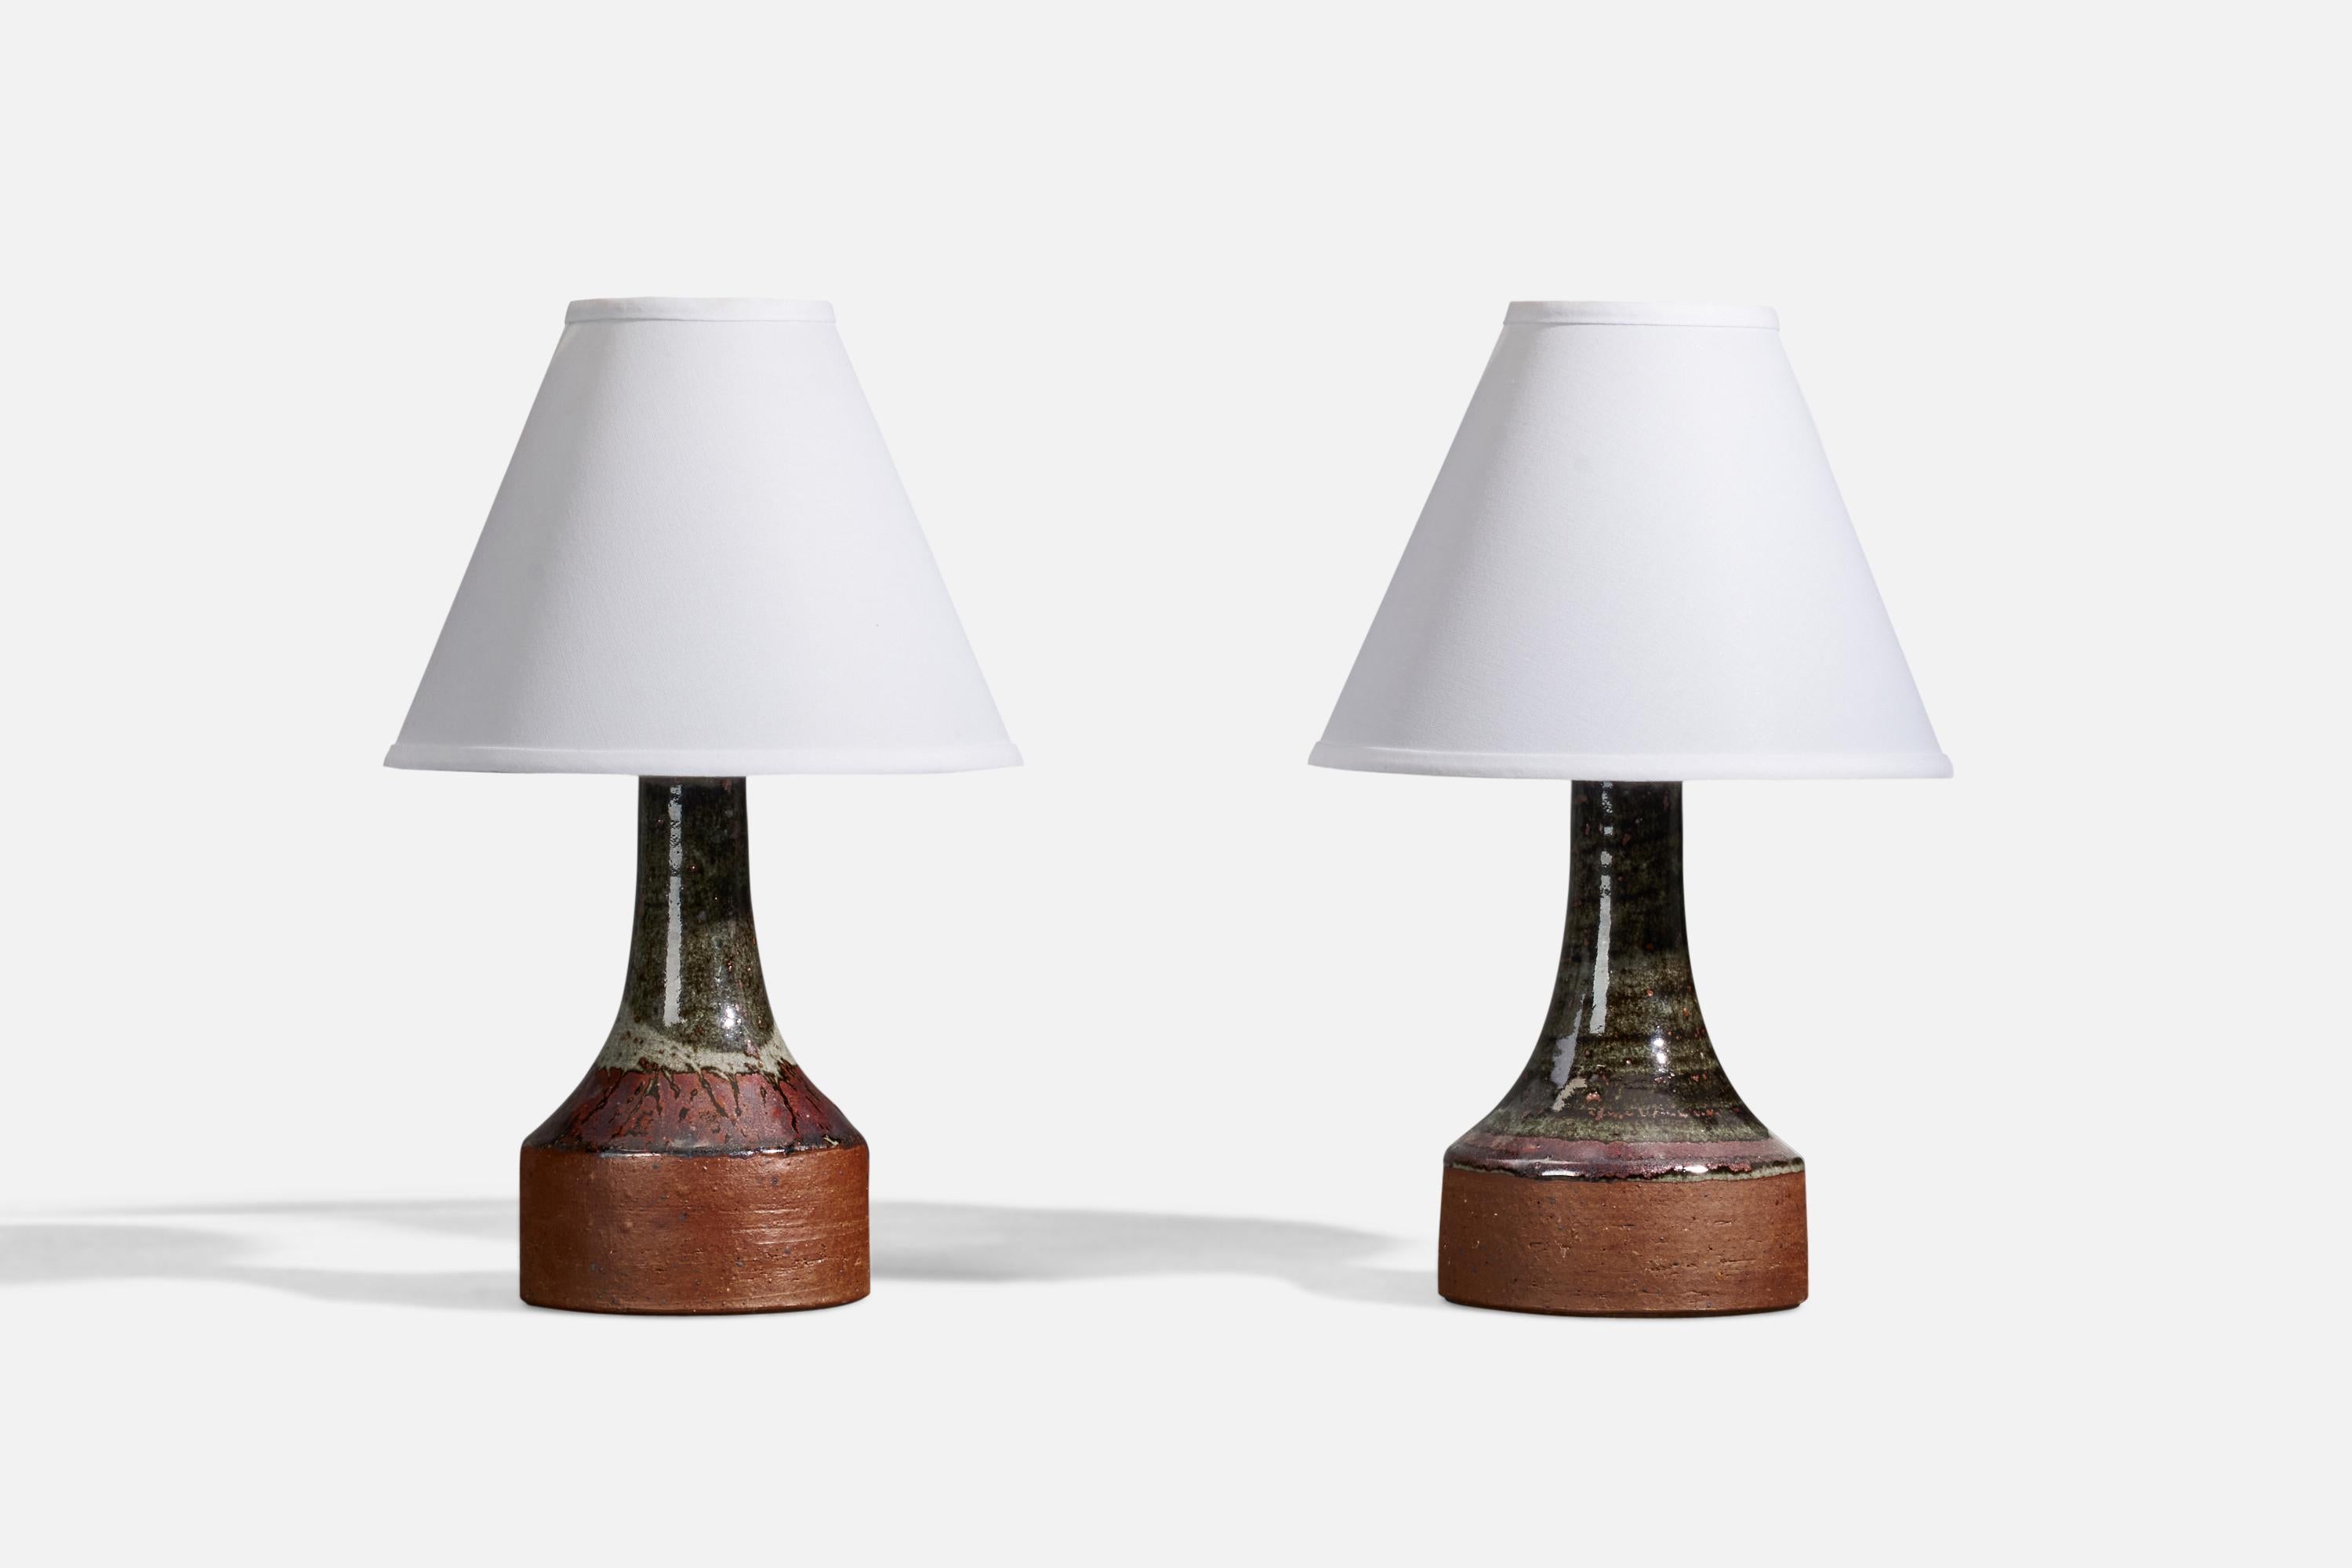 A pair of table lamps designed and produced by Helle Allpass in her studio, Denmark, 1960s. Stamped.

Stated dimensions exclude lampshades. Height includes socket. 

Glaze features brown-green colors.

Dimensions of Lamp (inches) : 11.62 x 5.83 x